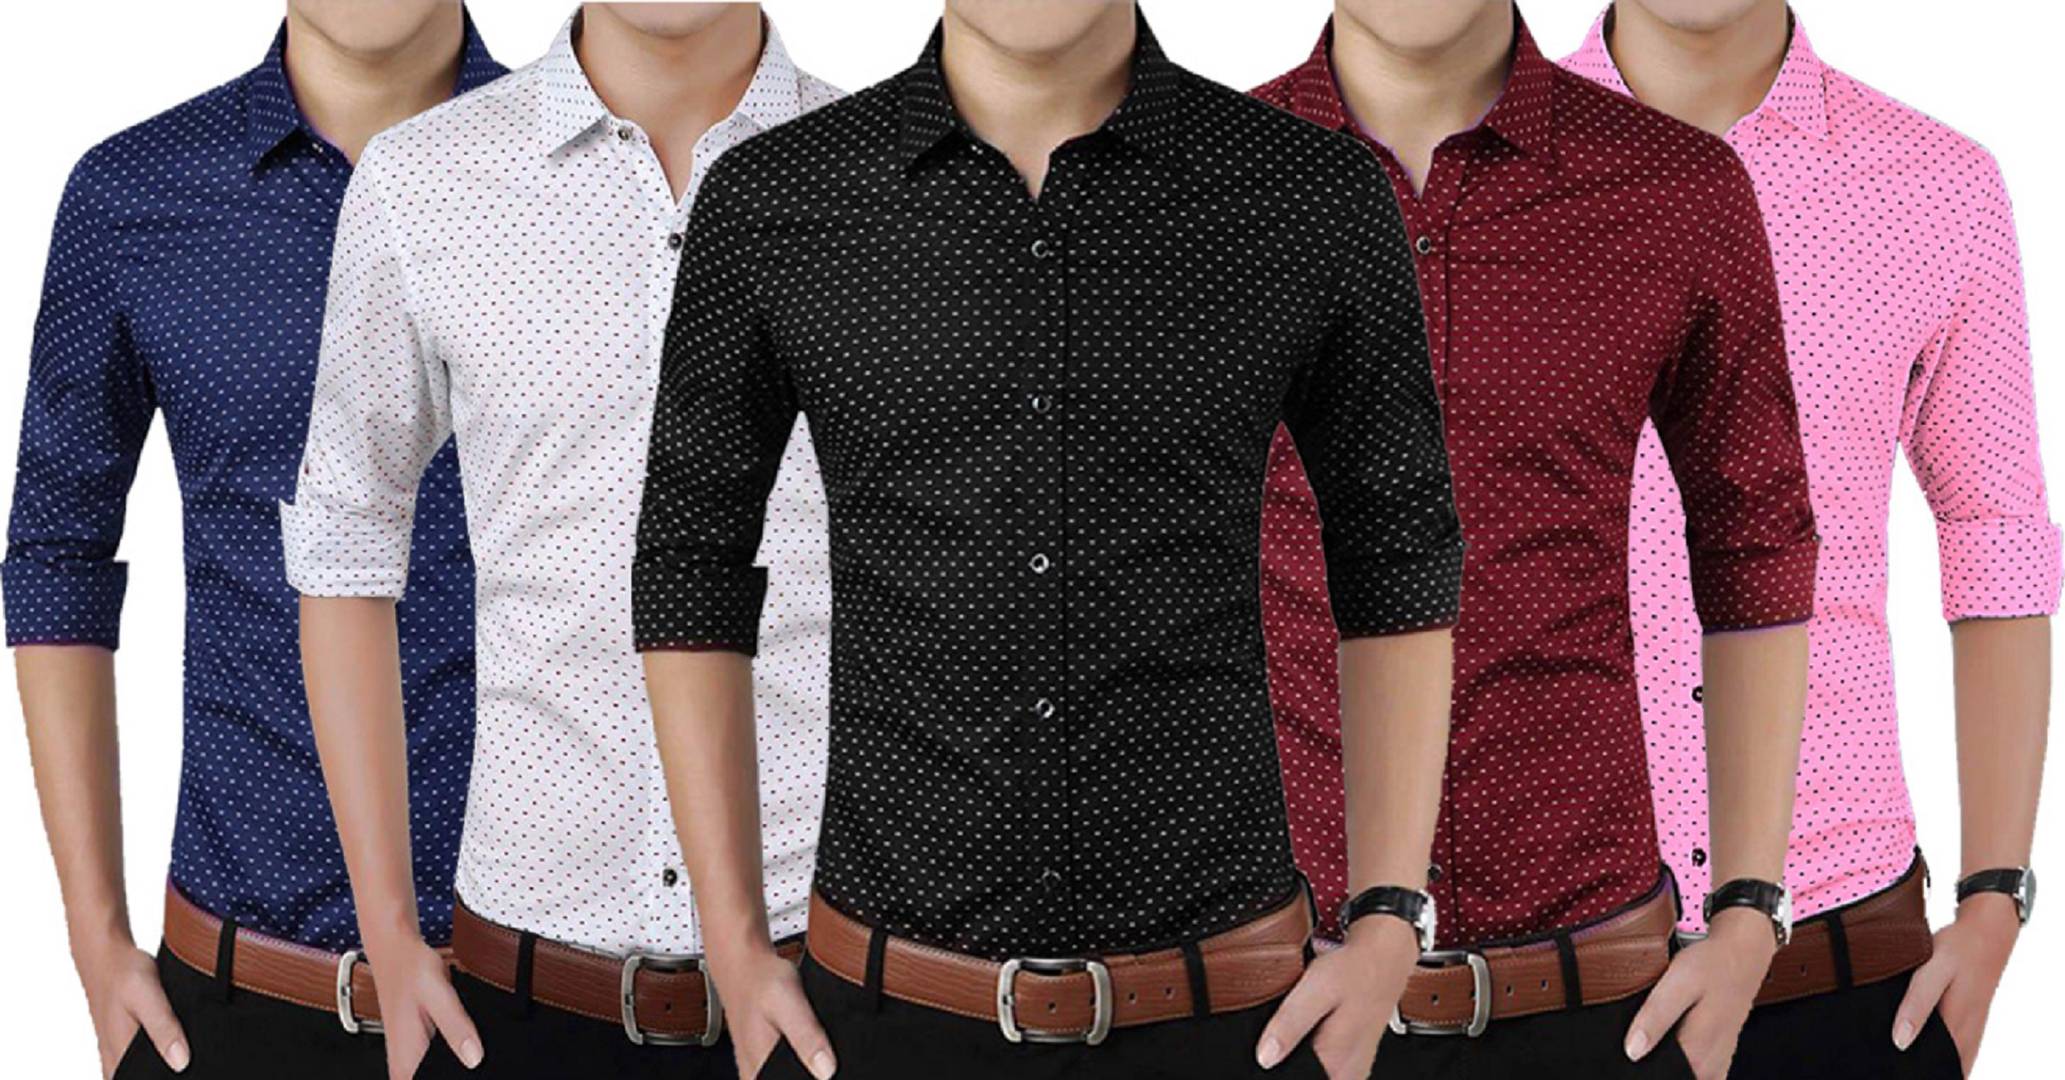 Men's Printed Cotton Blend Full Sleeve Casual Shirt Pack Of 5